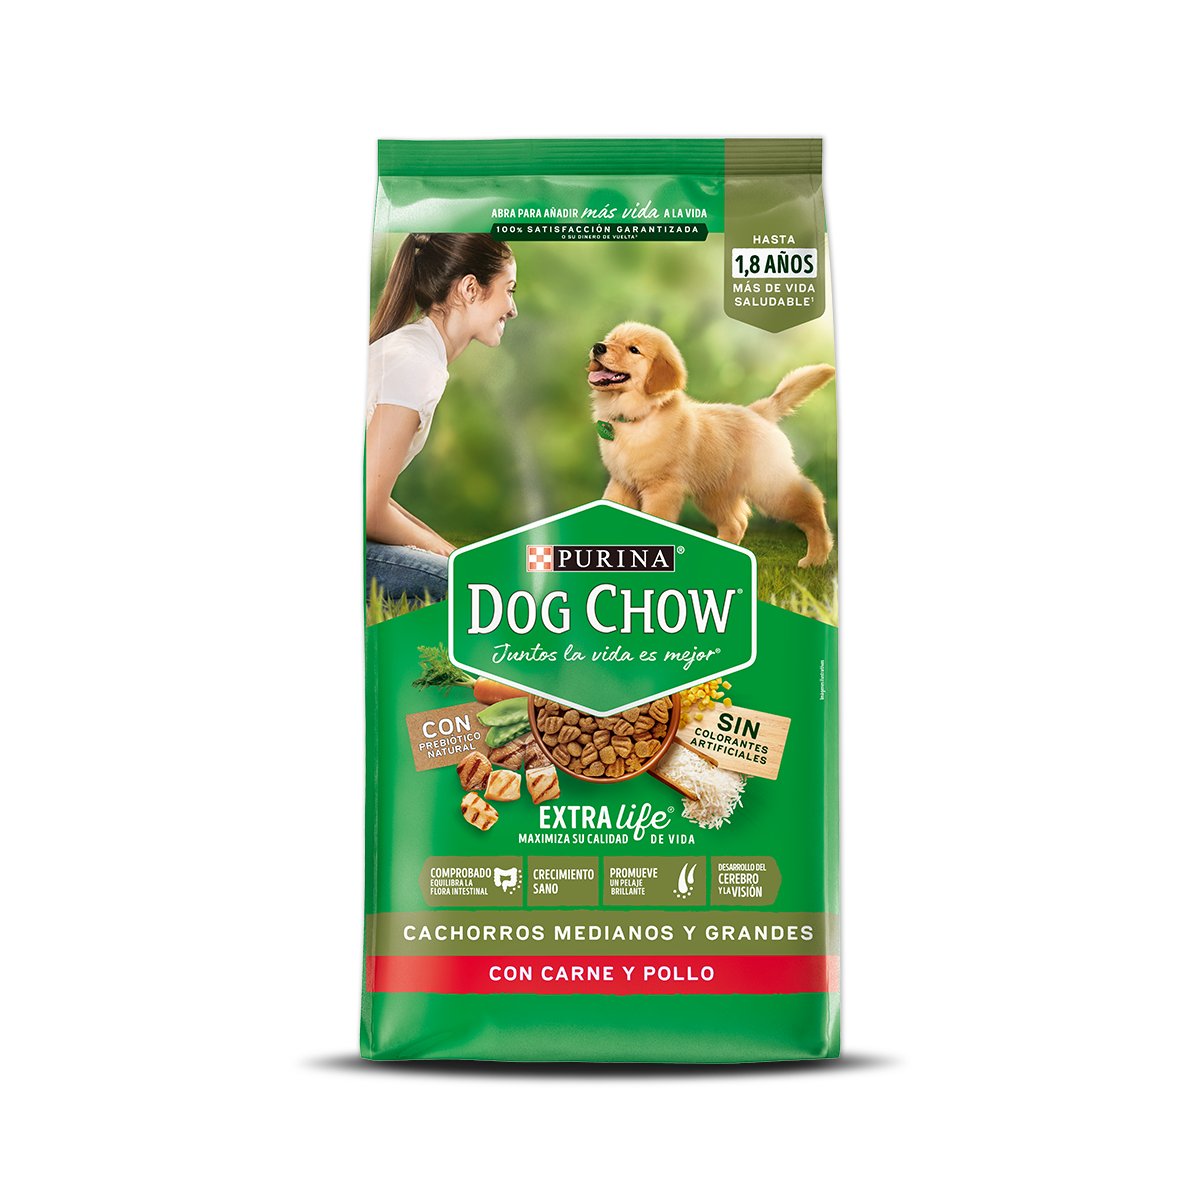 Purina-DogChow-chachorro-colombia.png